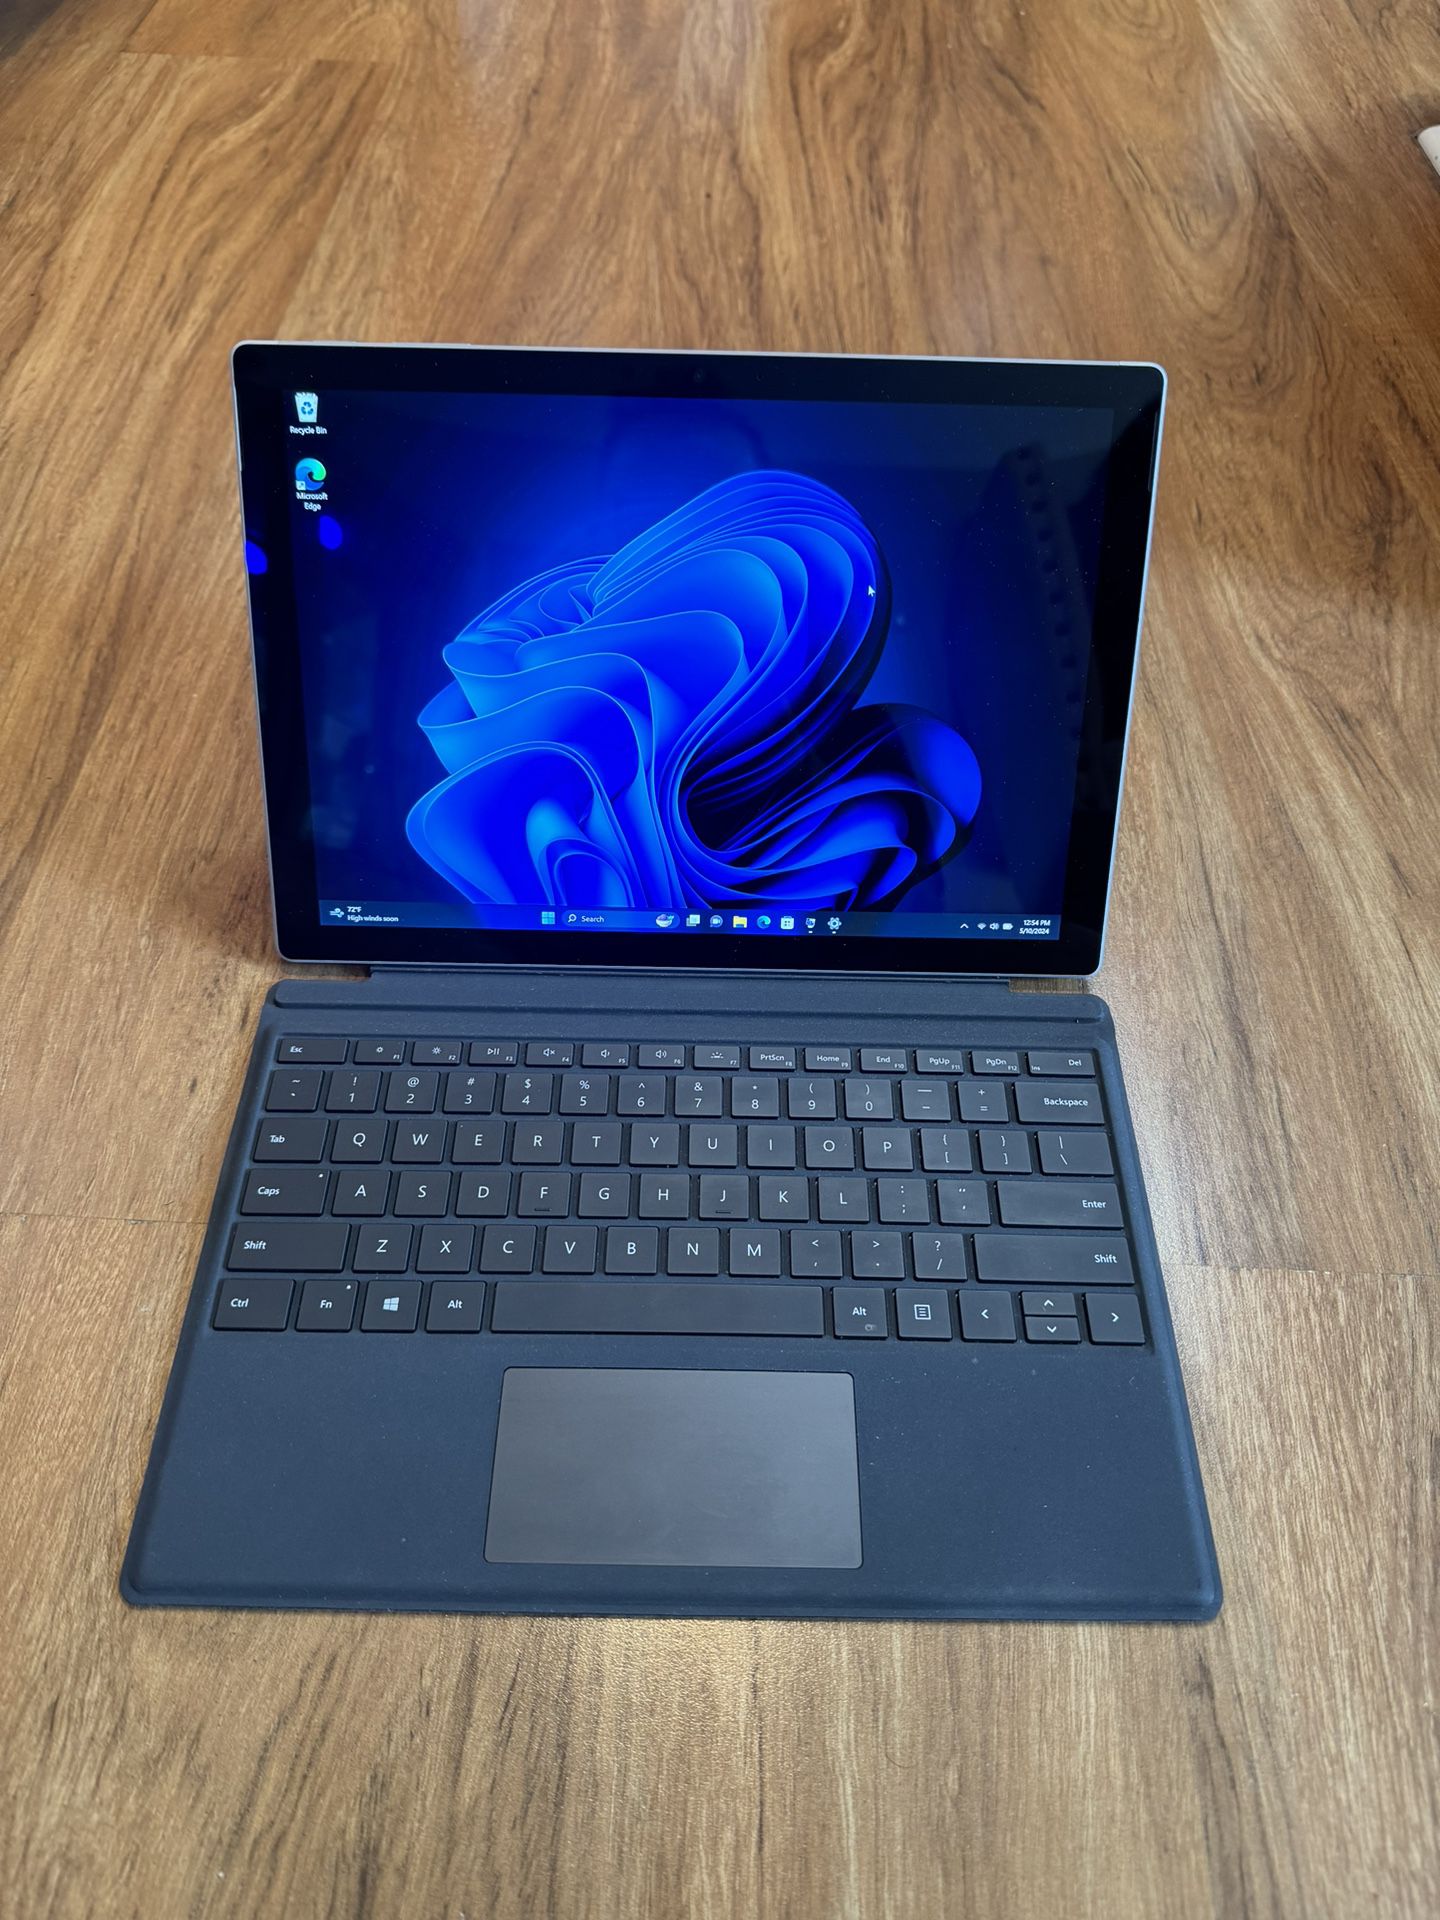 Microsoft Surface Pro 5 Touch Screen core i5 7th gen 8GB Ram 256GB SSD UHD Laptop Windows 11 Pro MS Office Suite Pro 2016!!!!  Specification: * core i